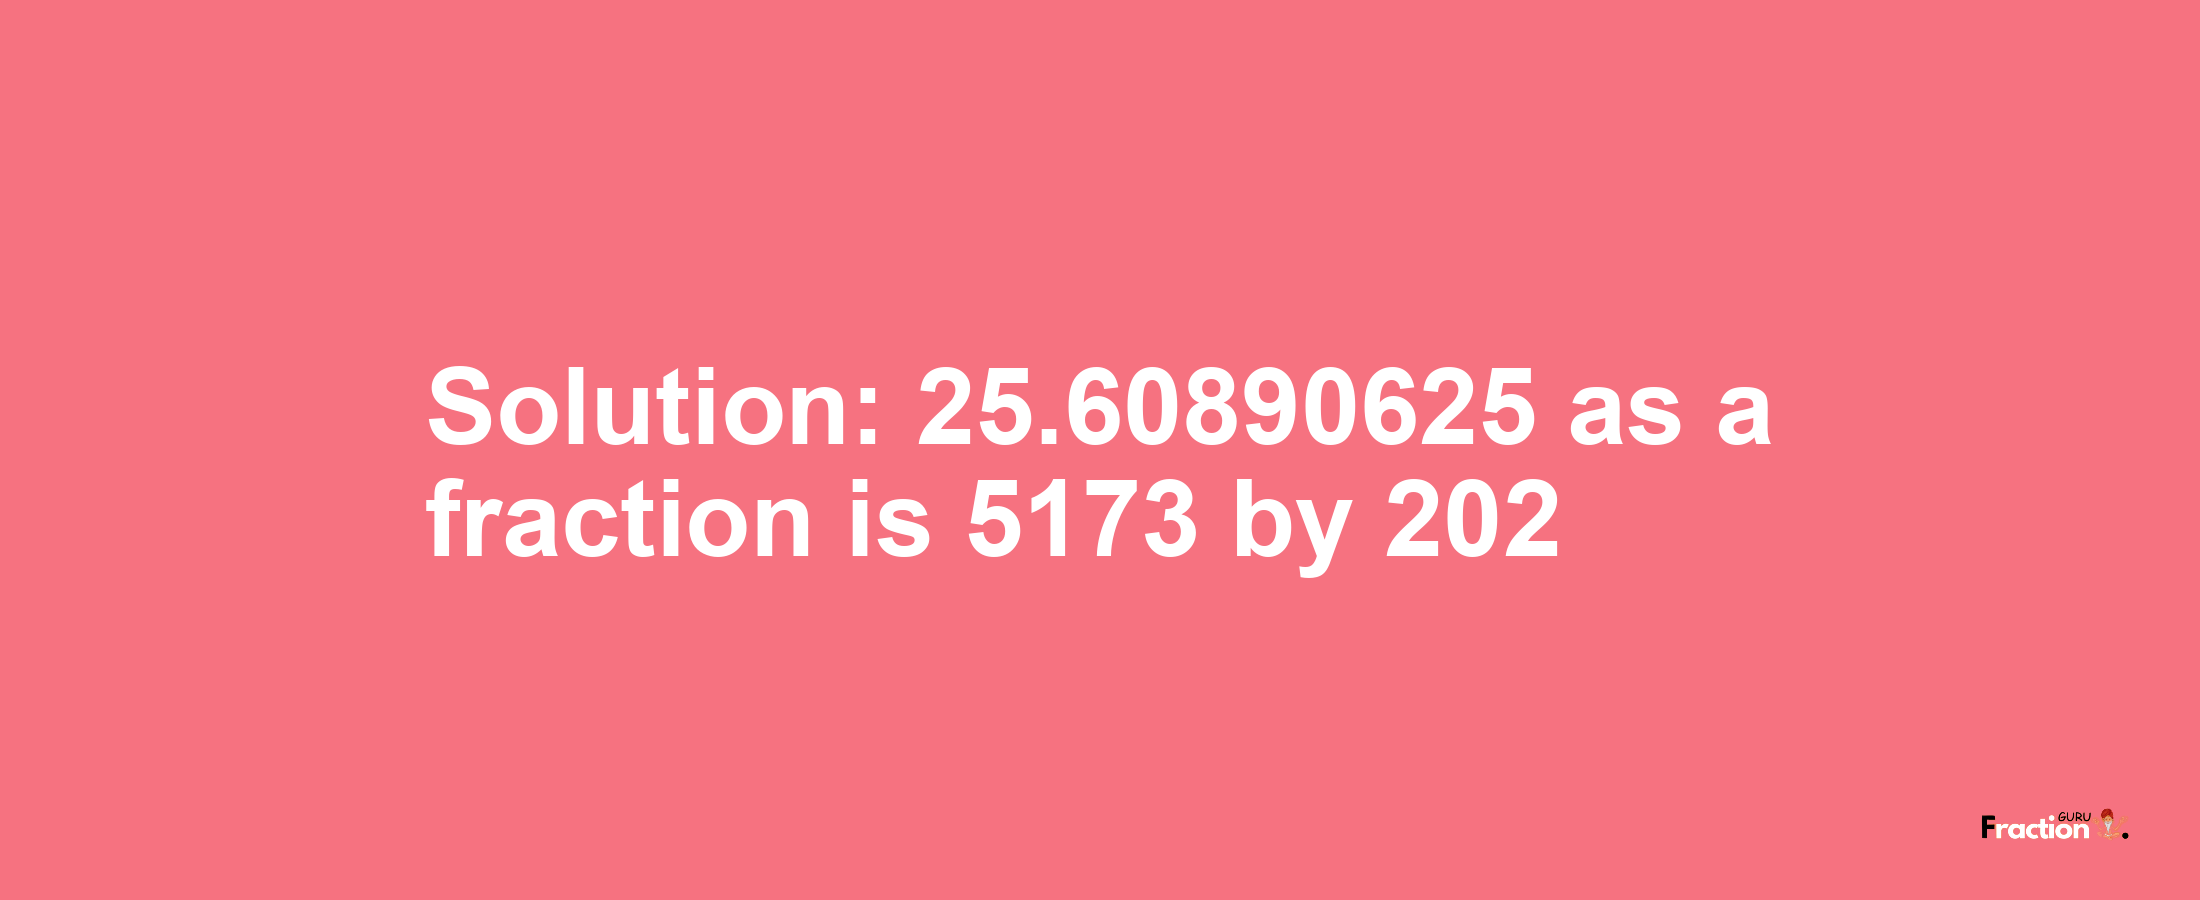 Solution:25.60890625 as a fraction is 5173/202